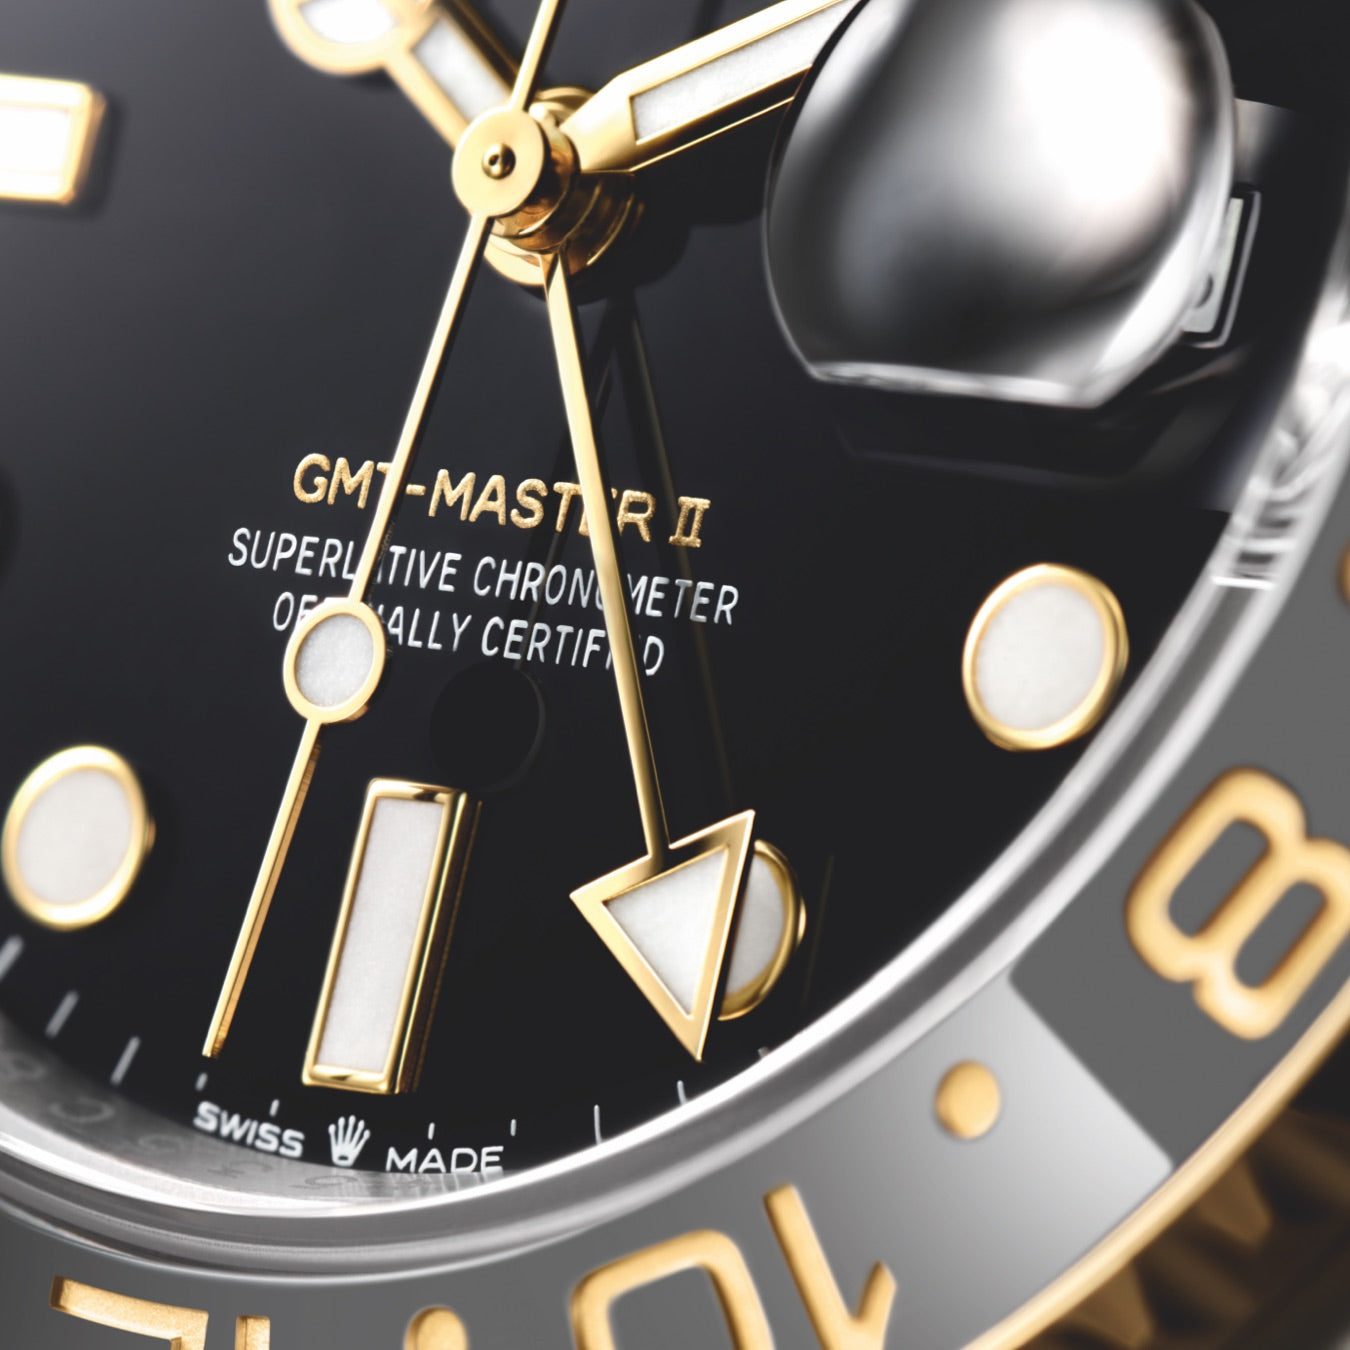 A close up look at the Rolex GMT-Master II, 126713GRNR.